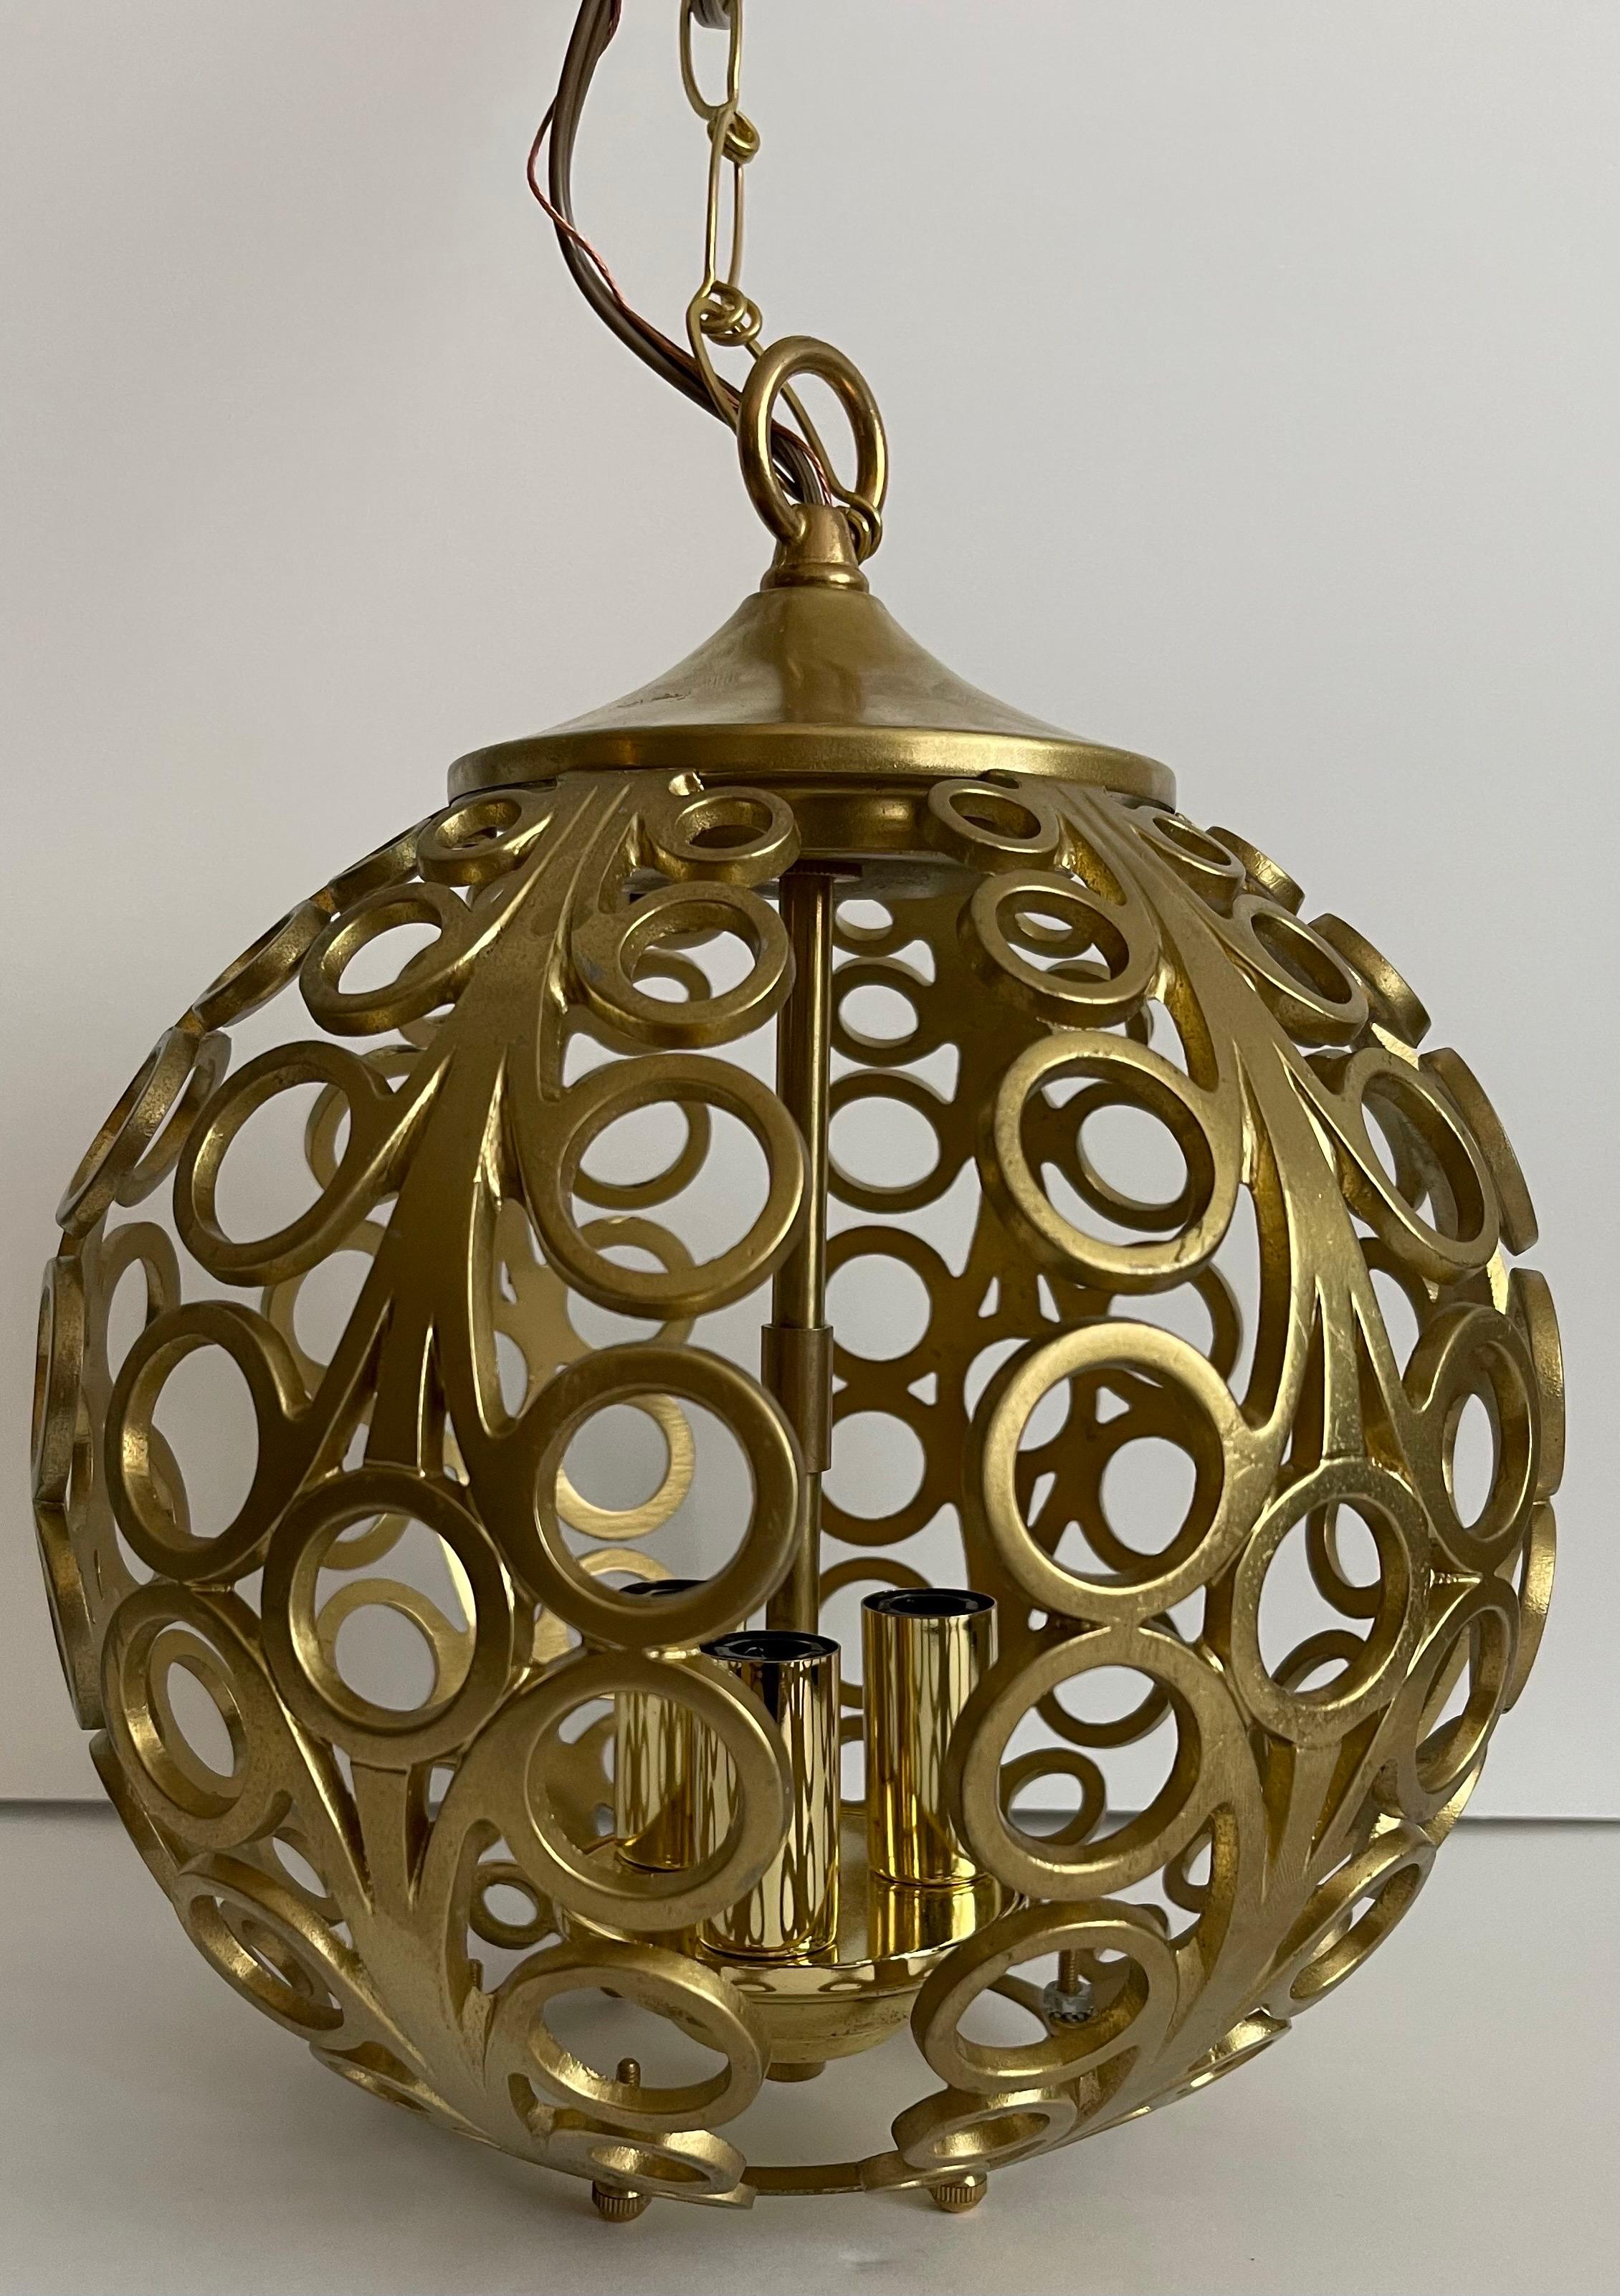 1960s Pierced gold metal pendant light. As found painted gold finish. Newly rewired. Fixture takes three chandelier bulbs (not included). 36” L chain and brass canopy included.